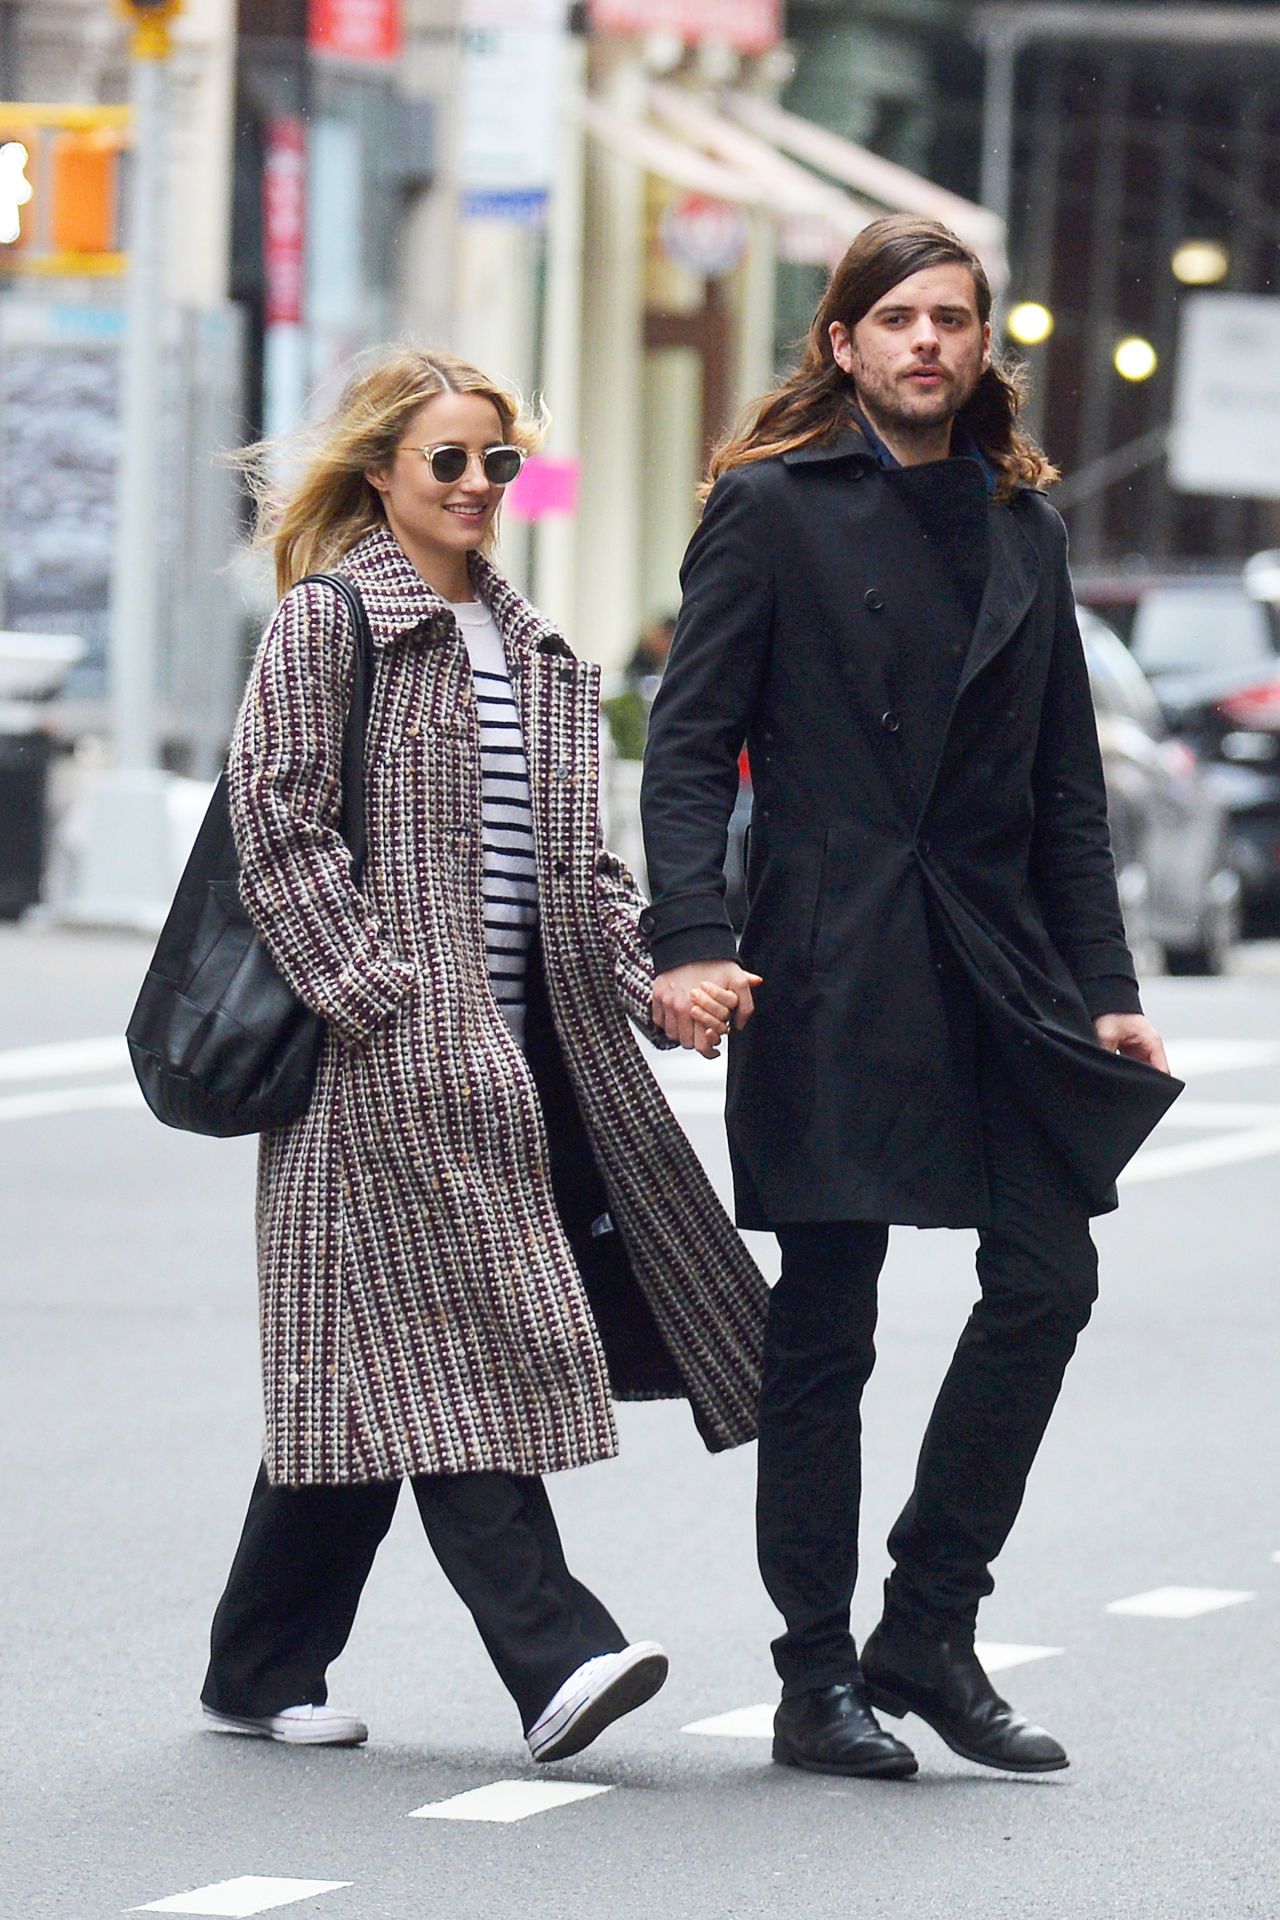 dianna-agron-and-winston-marshall-on-a-stroll-in-nyc-02-25-2018-5.jpg